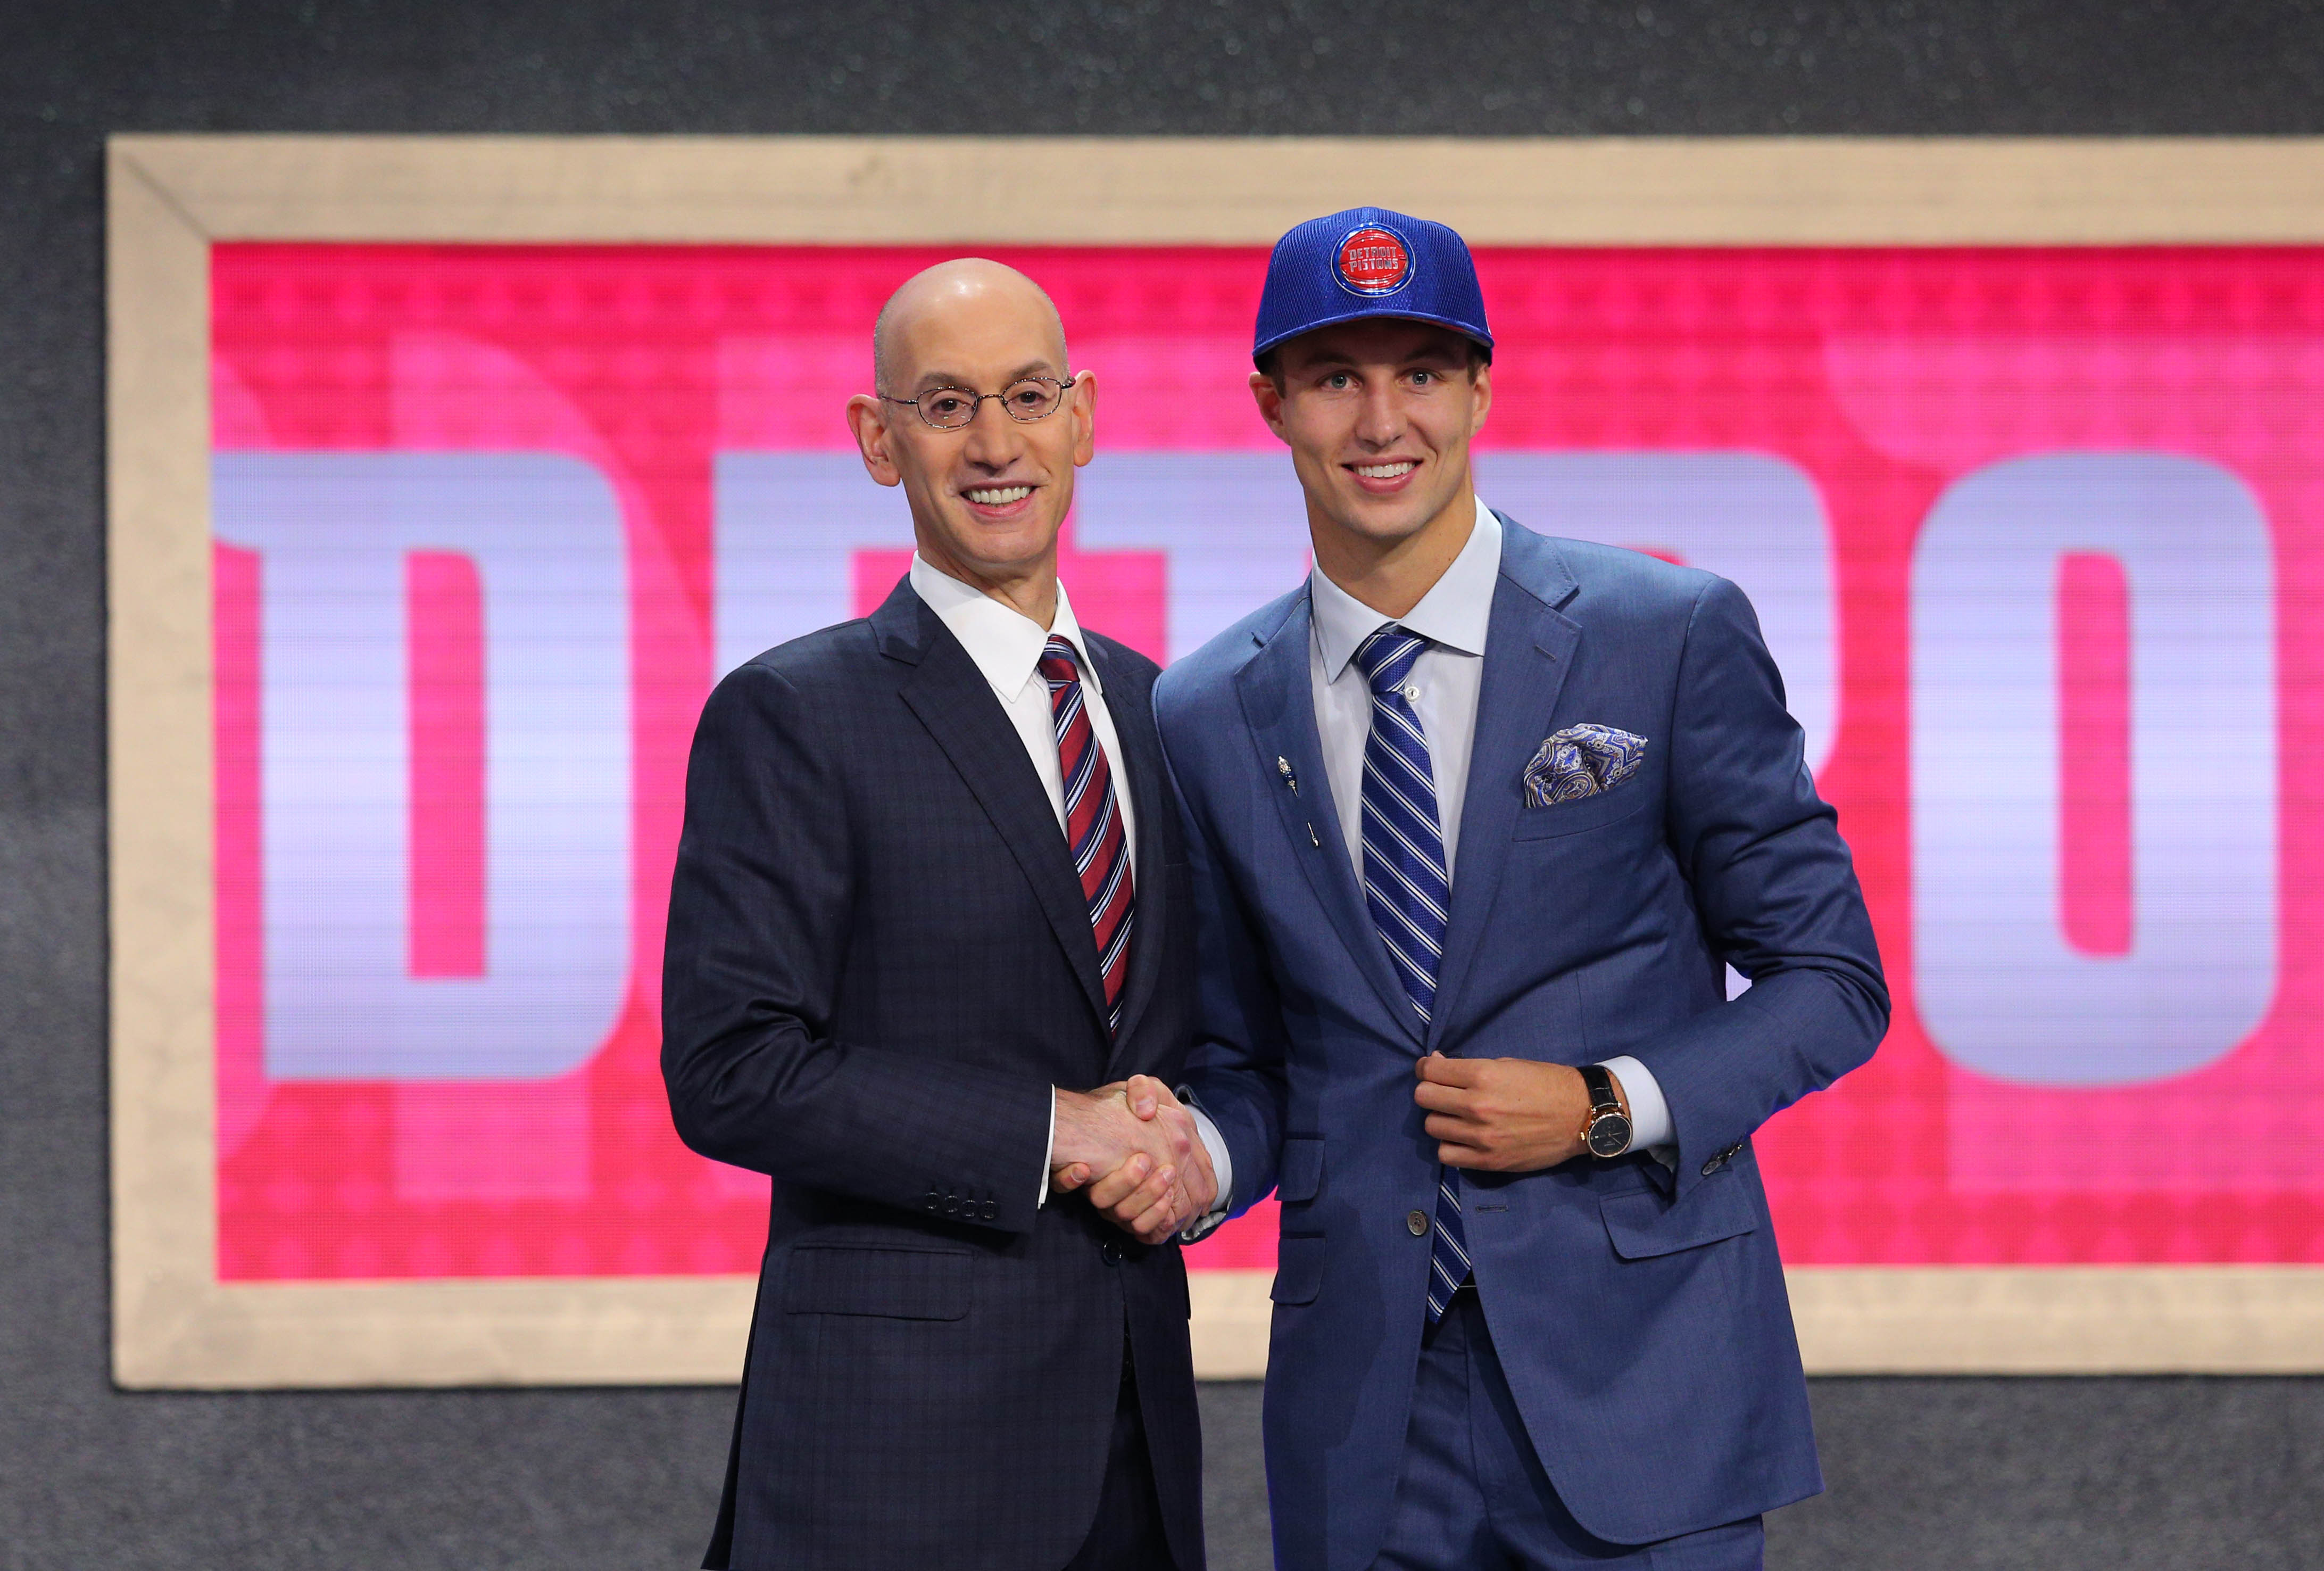 Luke Kennard could have immediate impact for Pistons